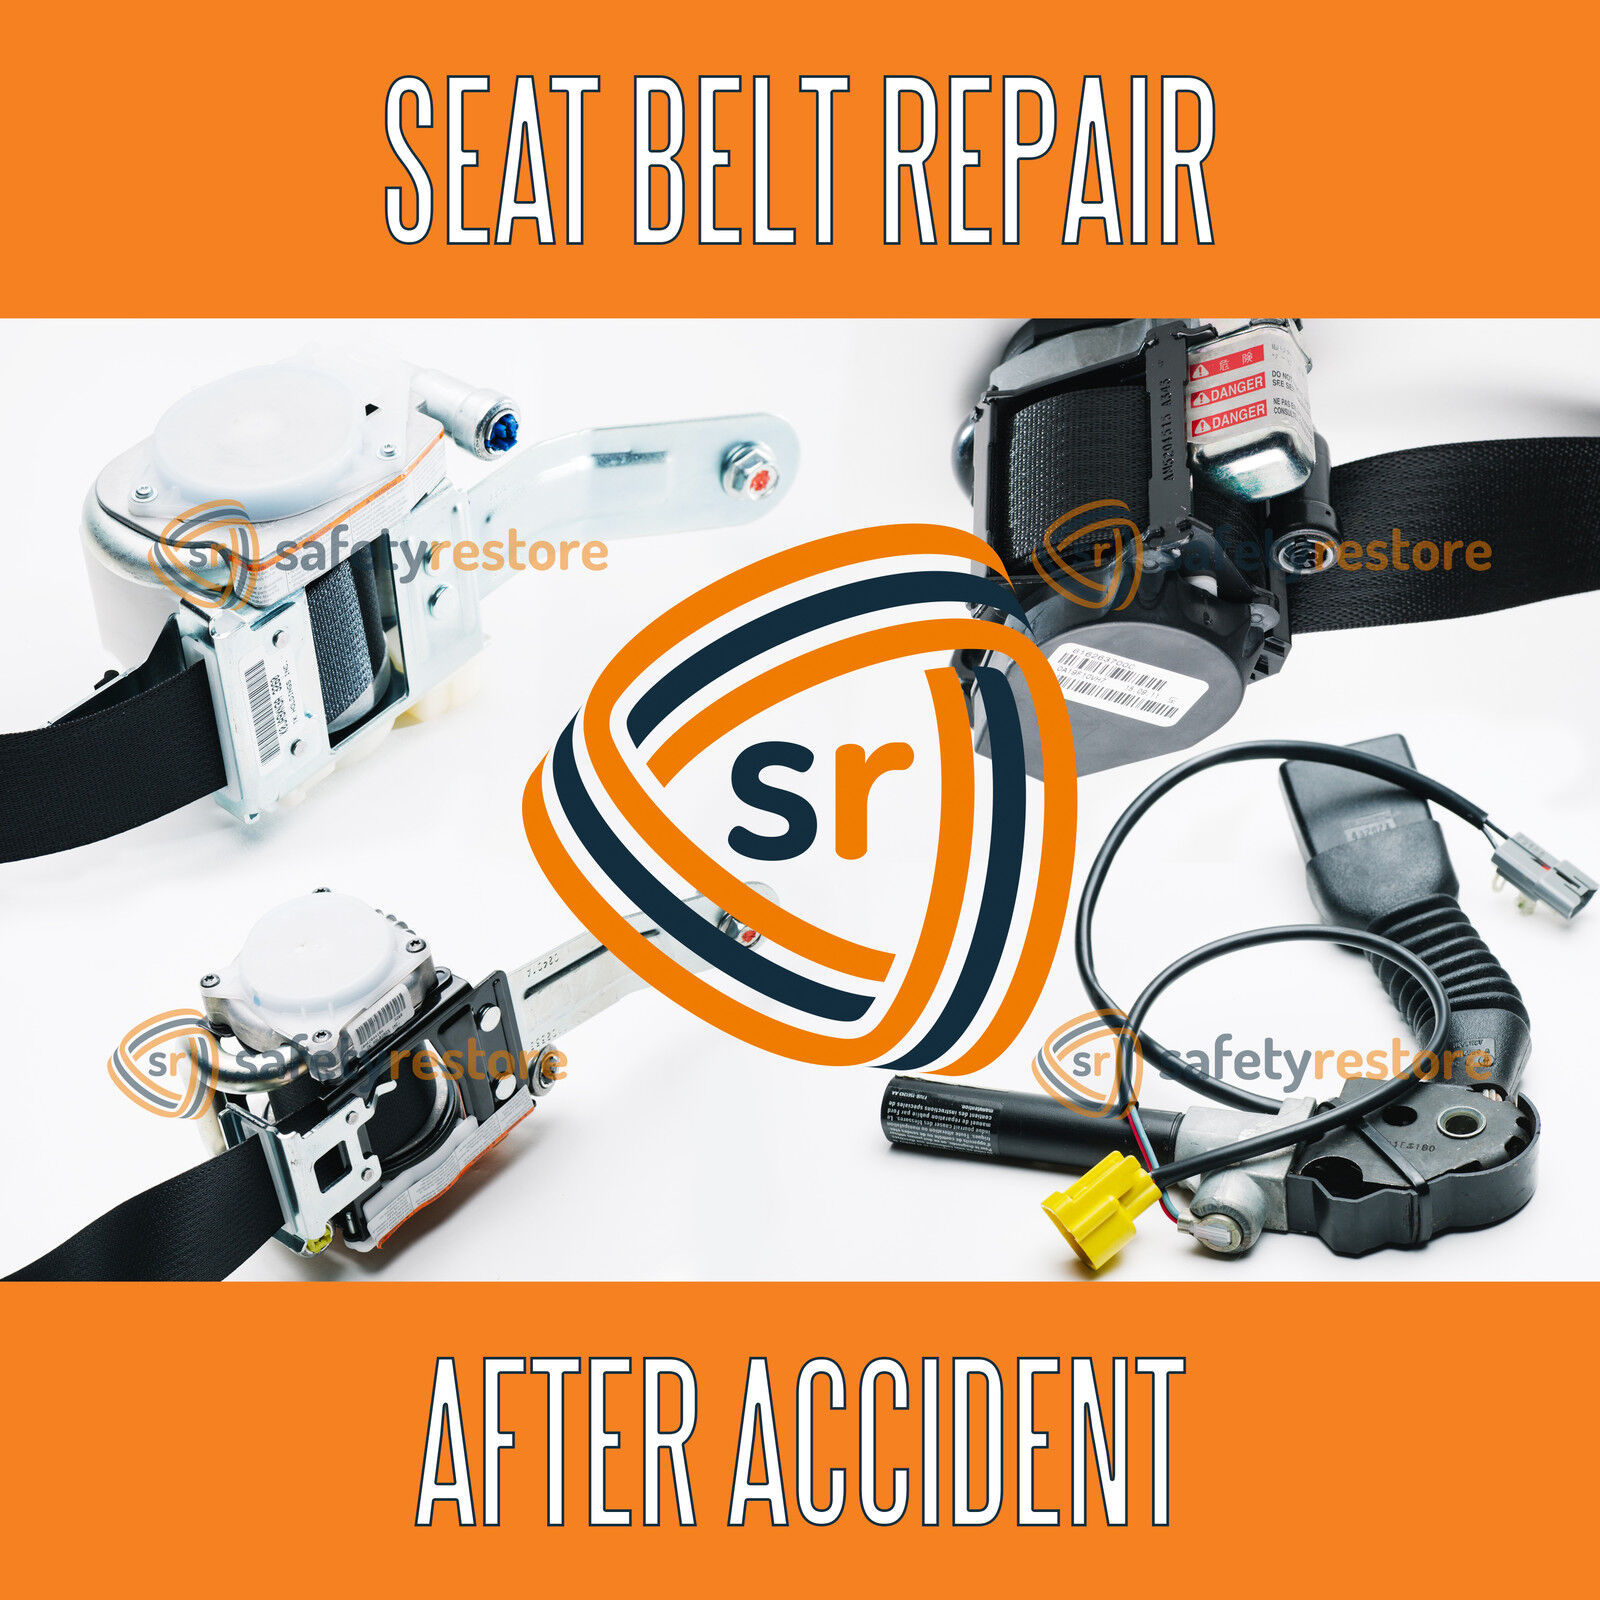 Single-Stage Safety Belt Repair Service - All Makes and Models - 24hrs